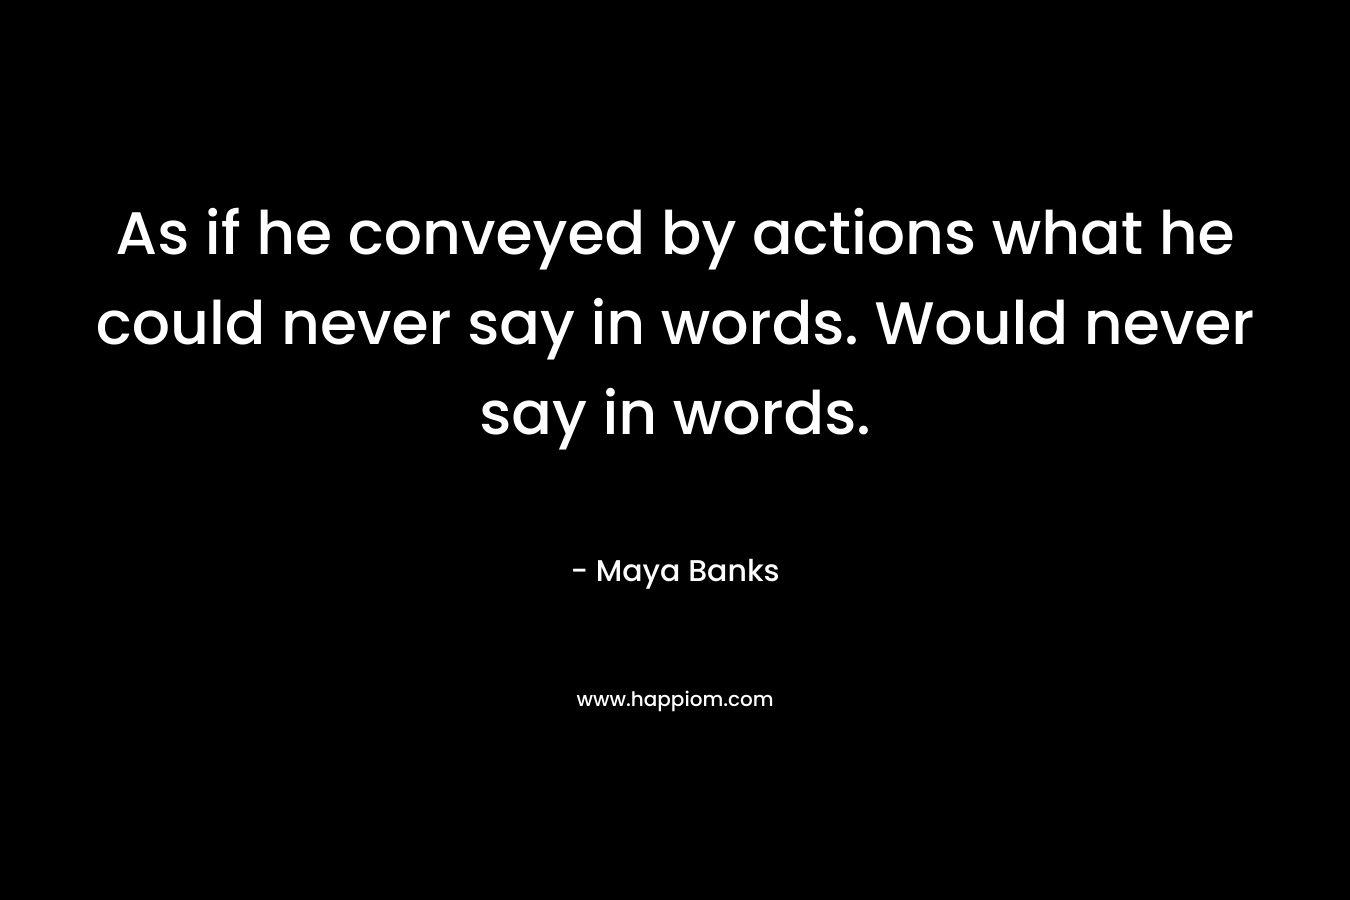 As if he conveyed by actions what he could never say in words. Would never say in words. – Maya Banks